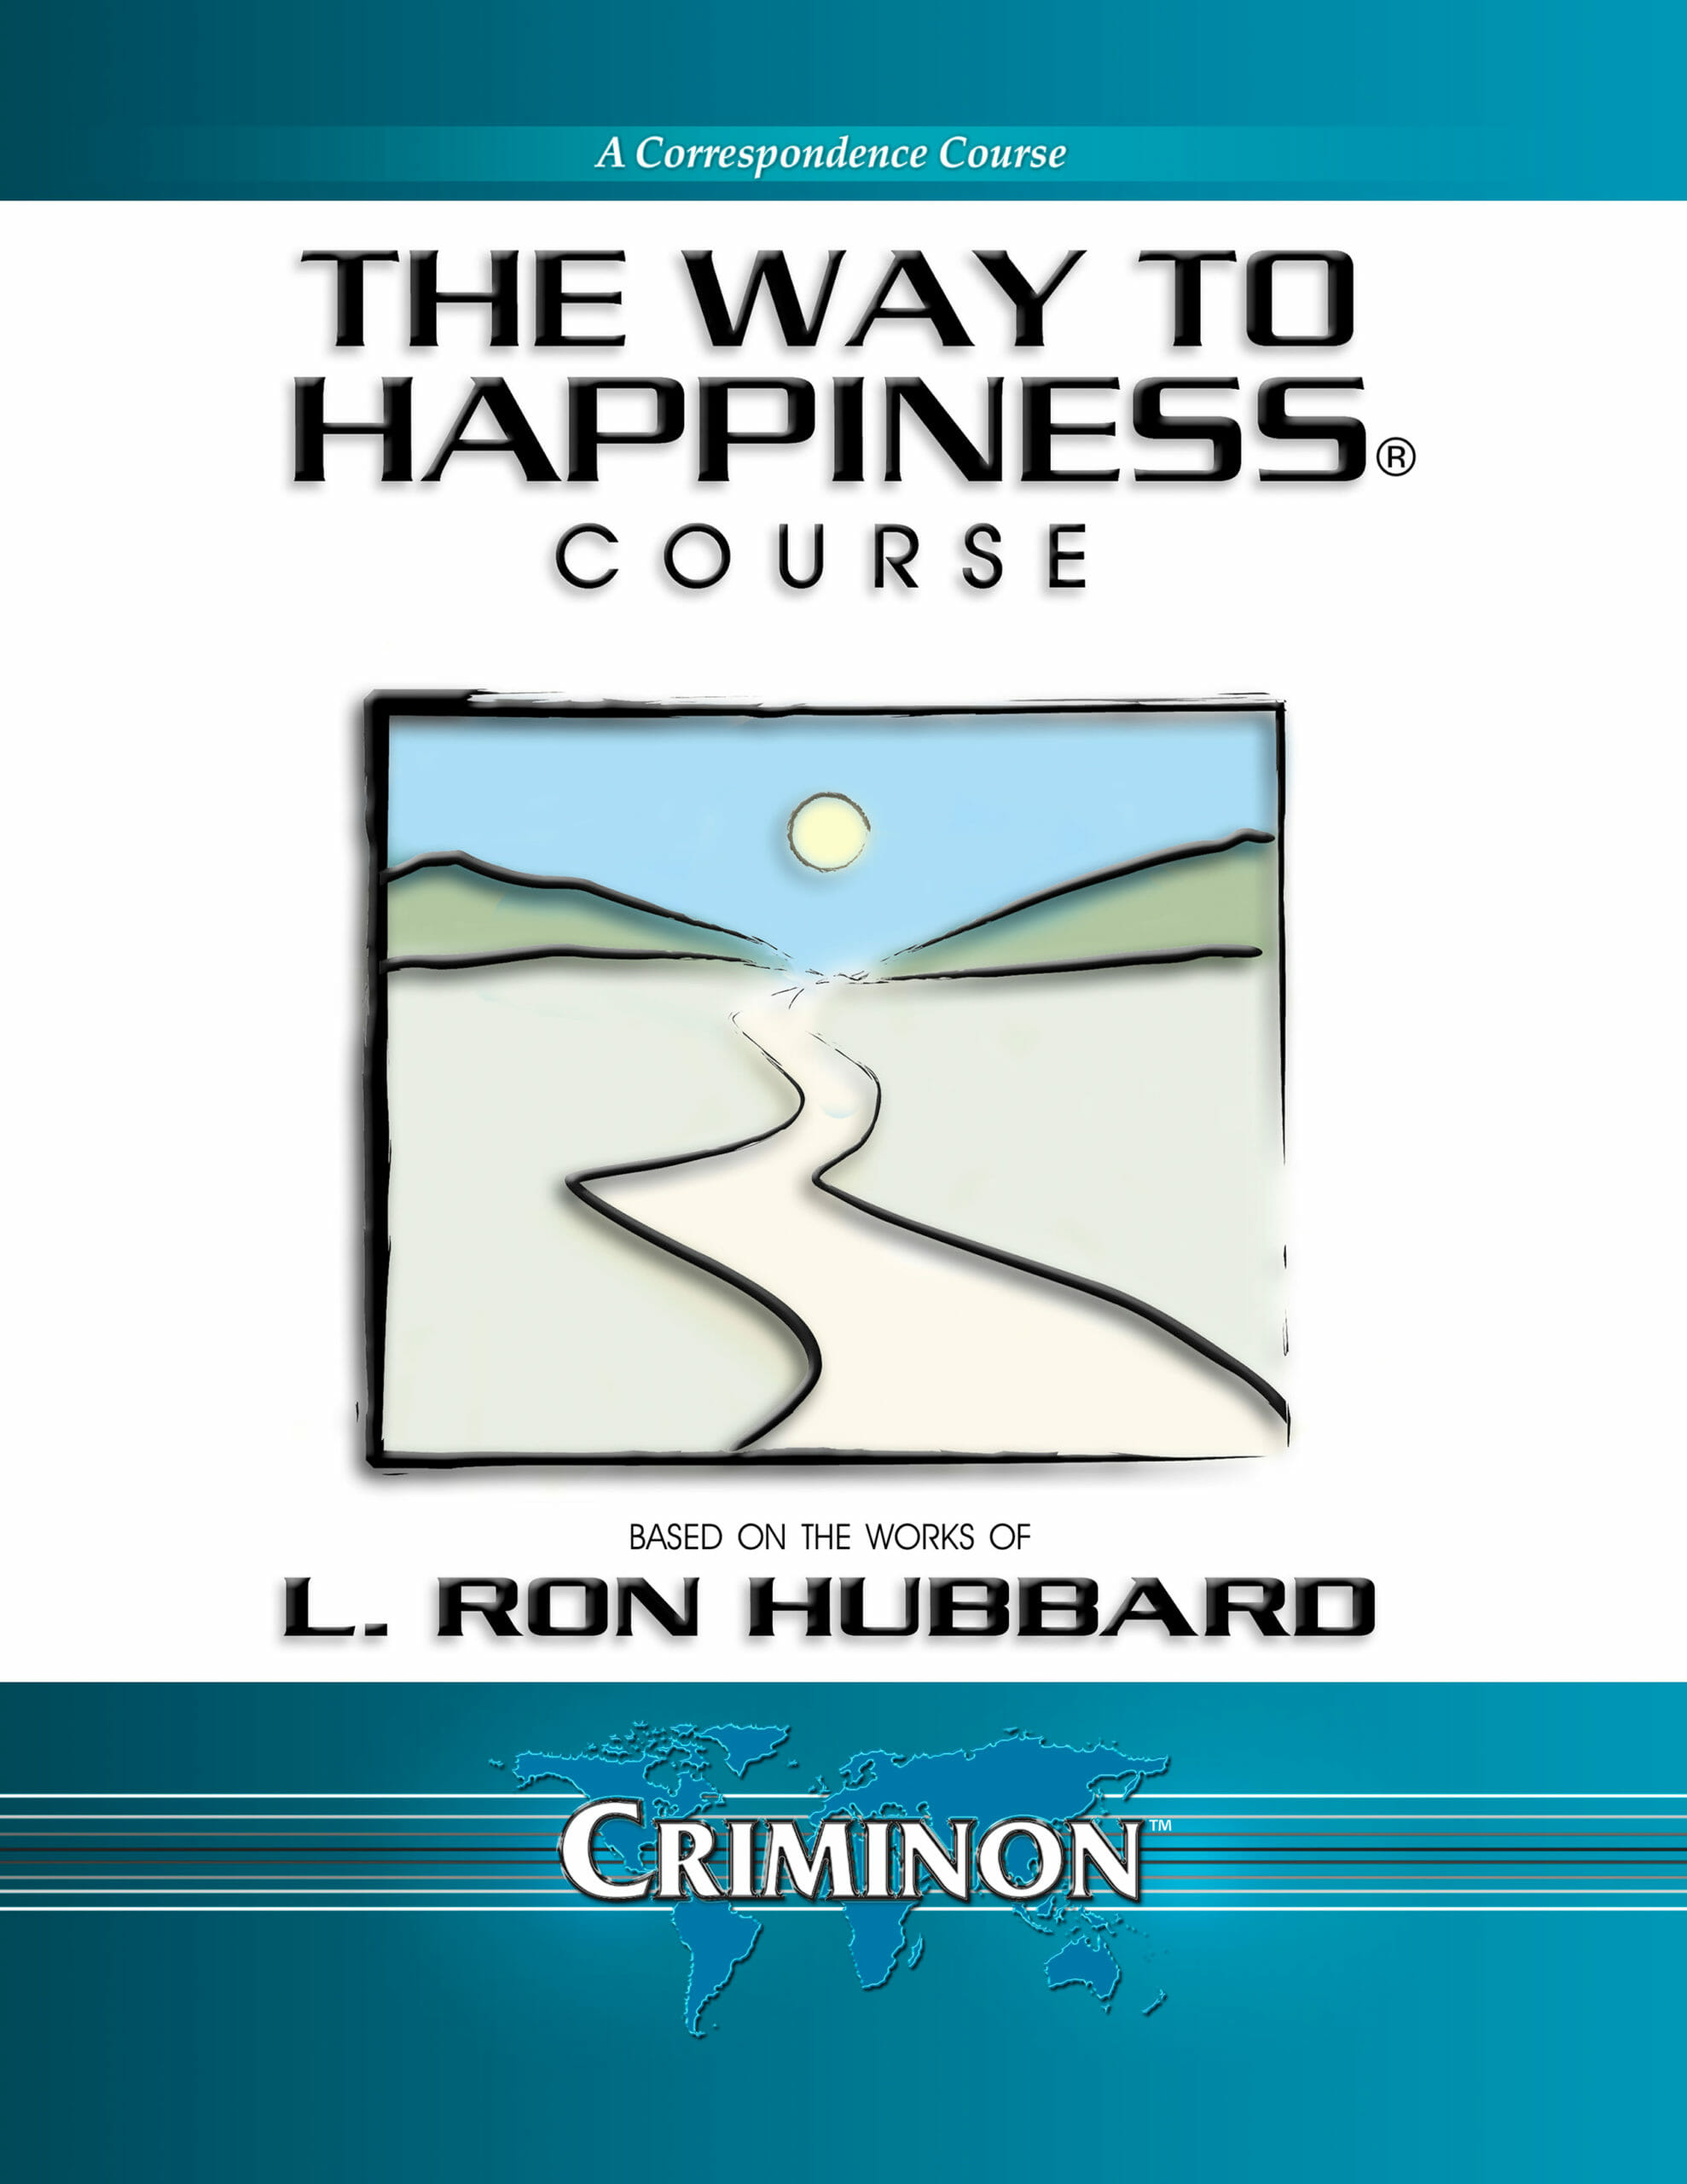 The Way to Happiness Course - Criminon